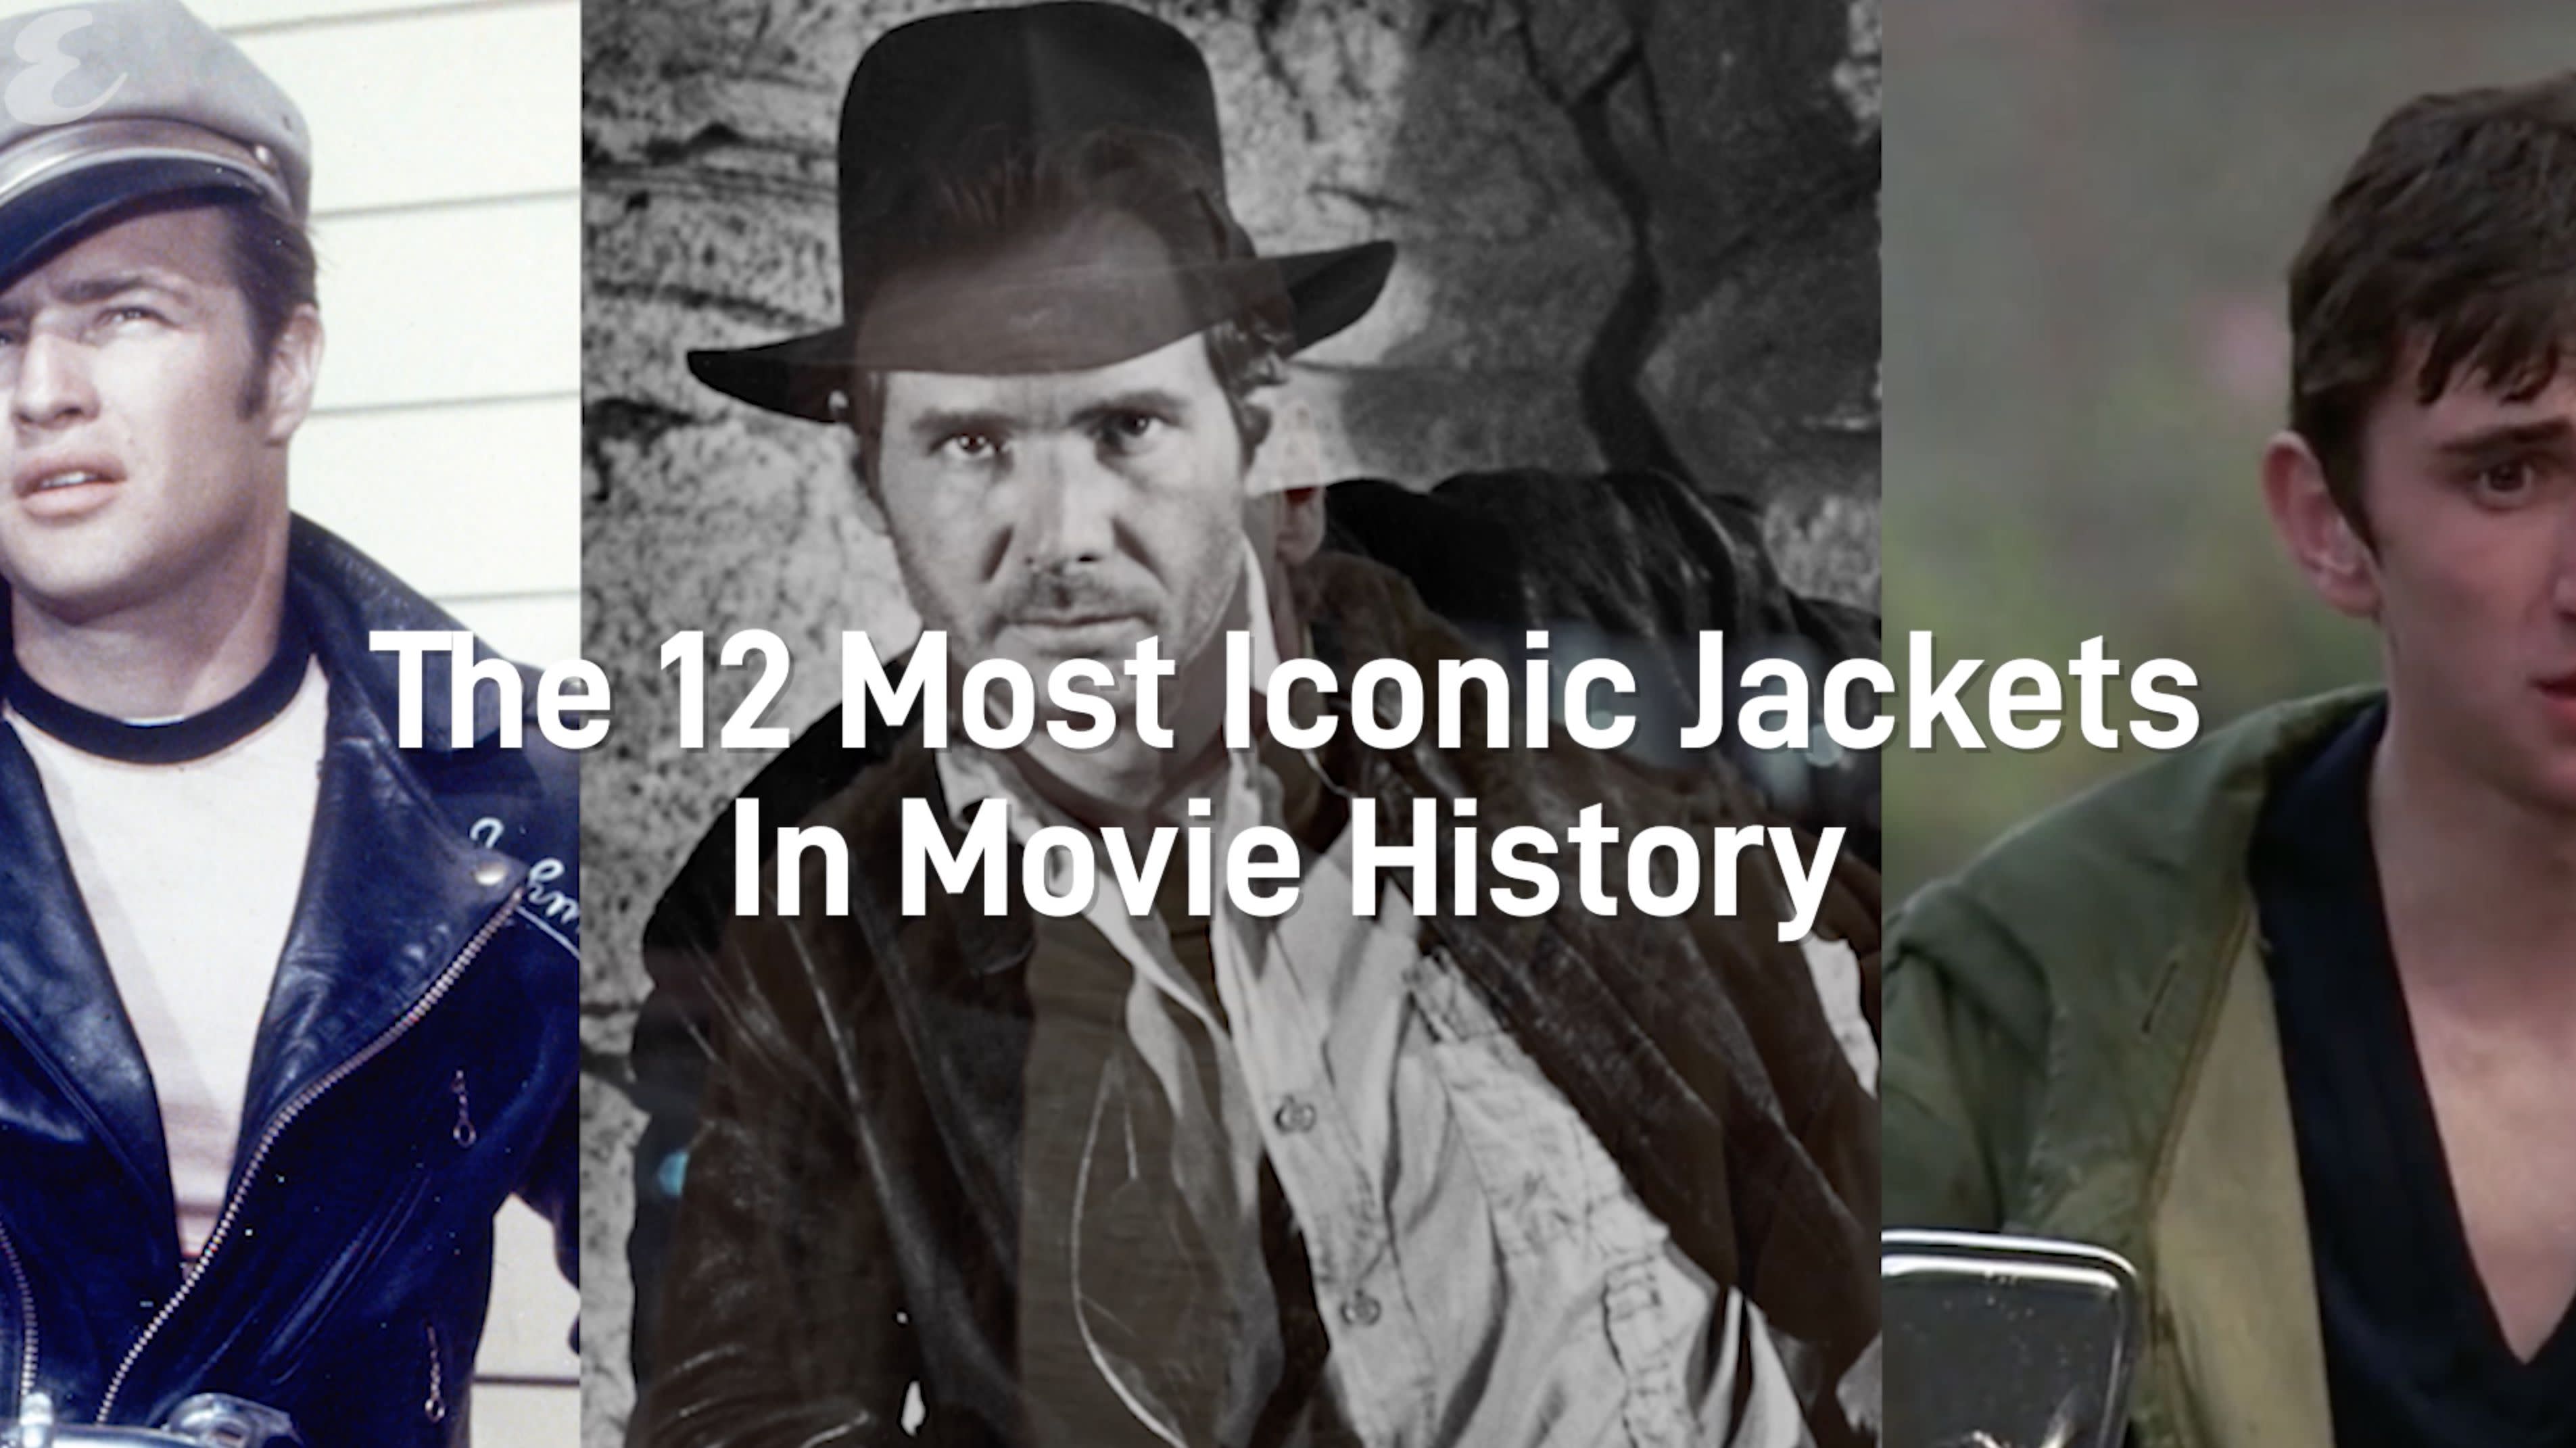 The 12 Most Iconic Jackets In Movie History